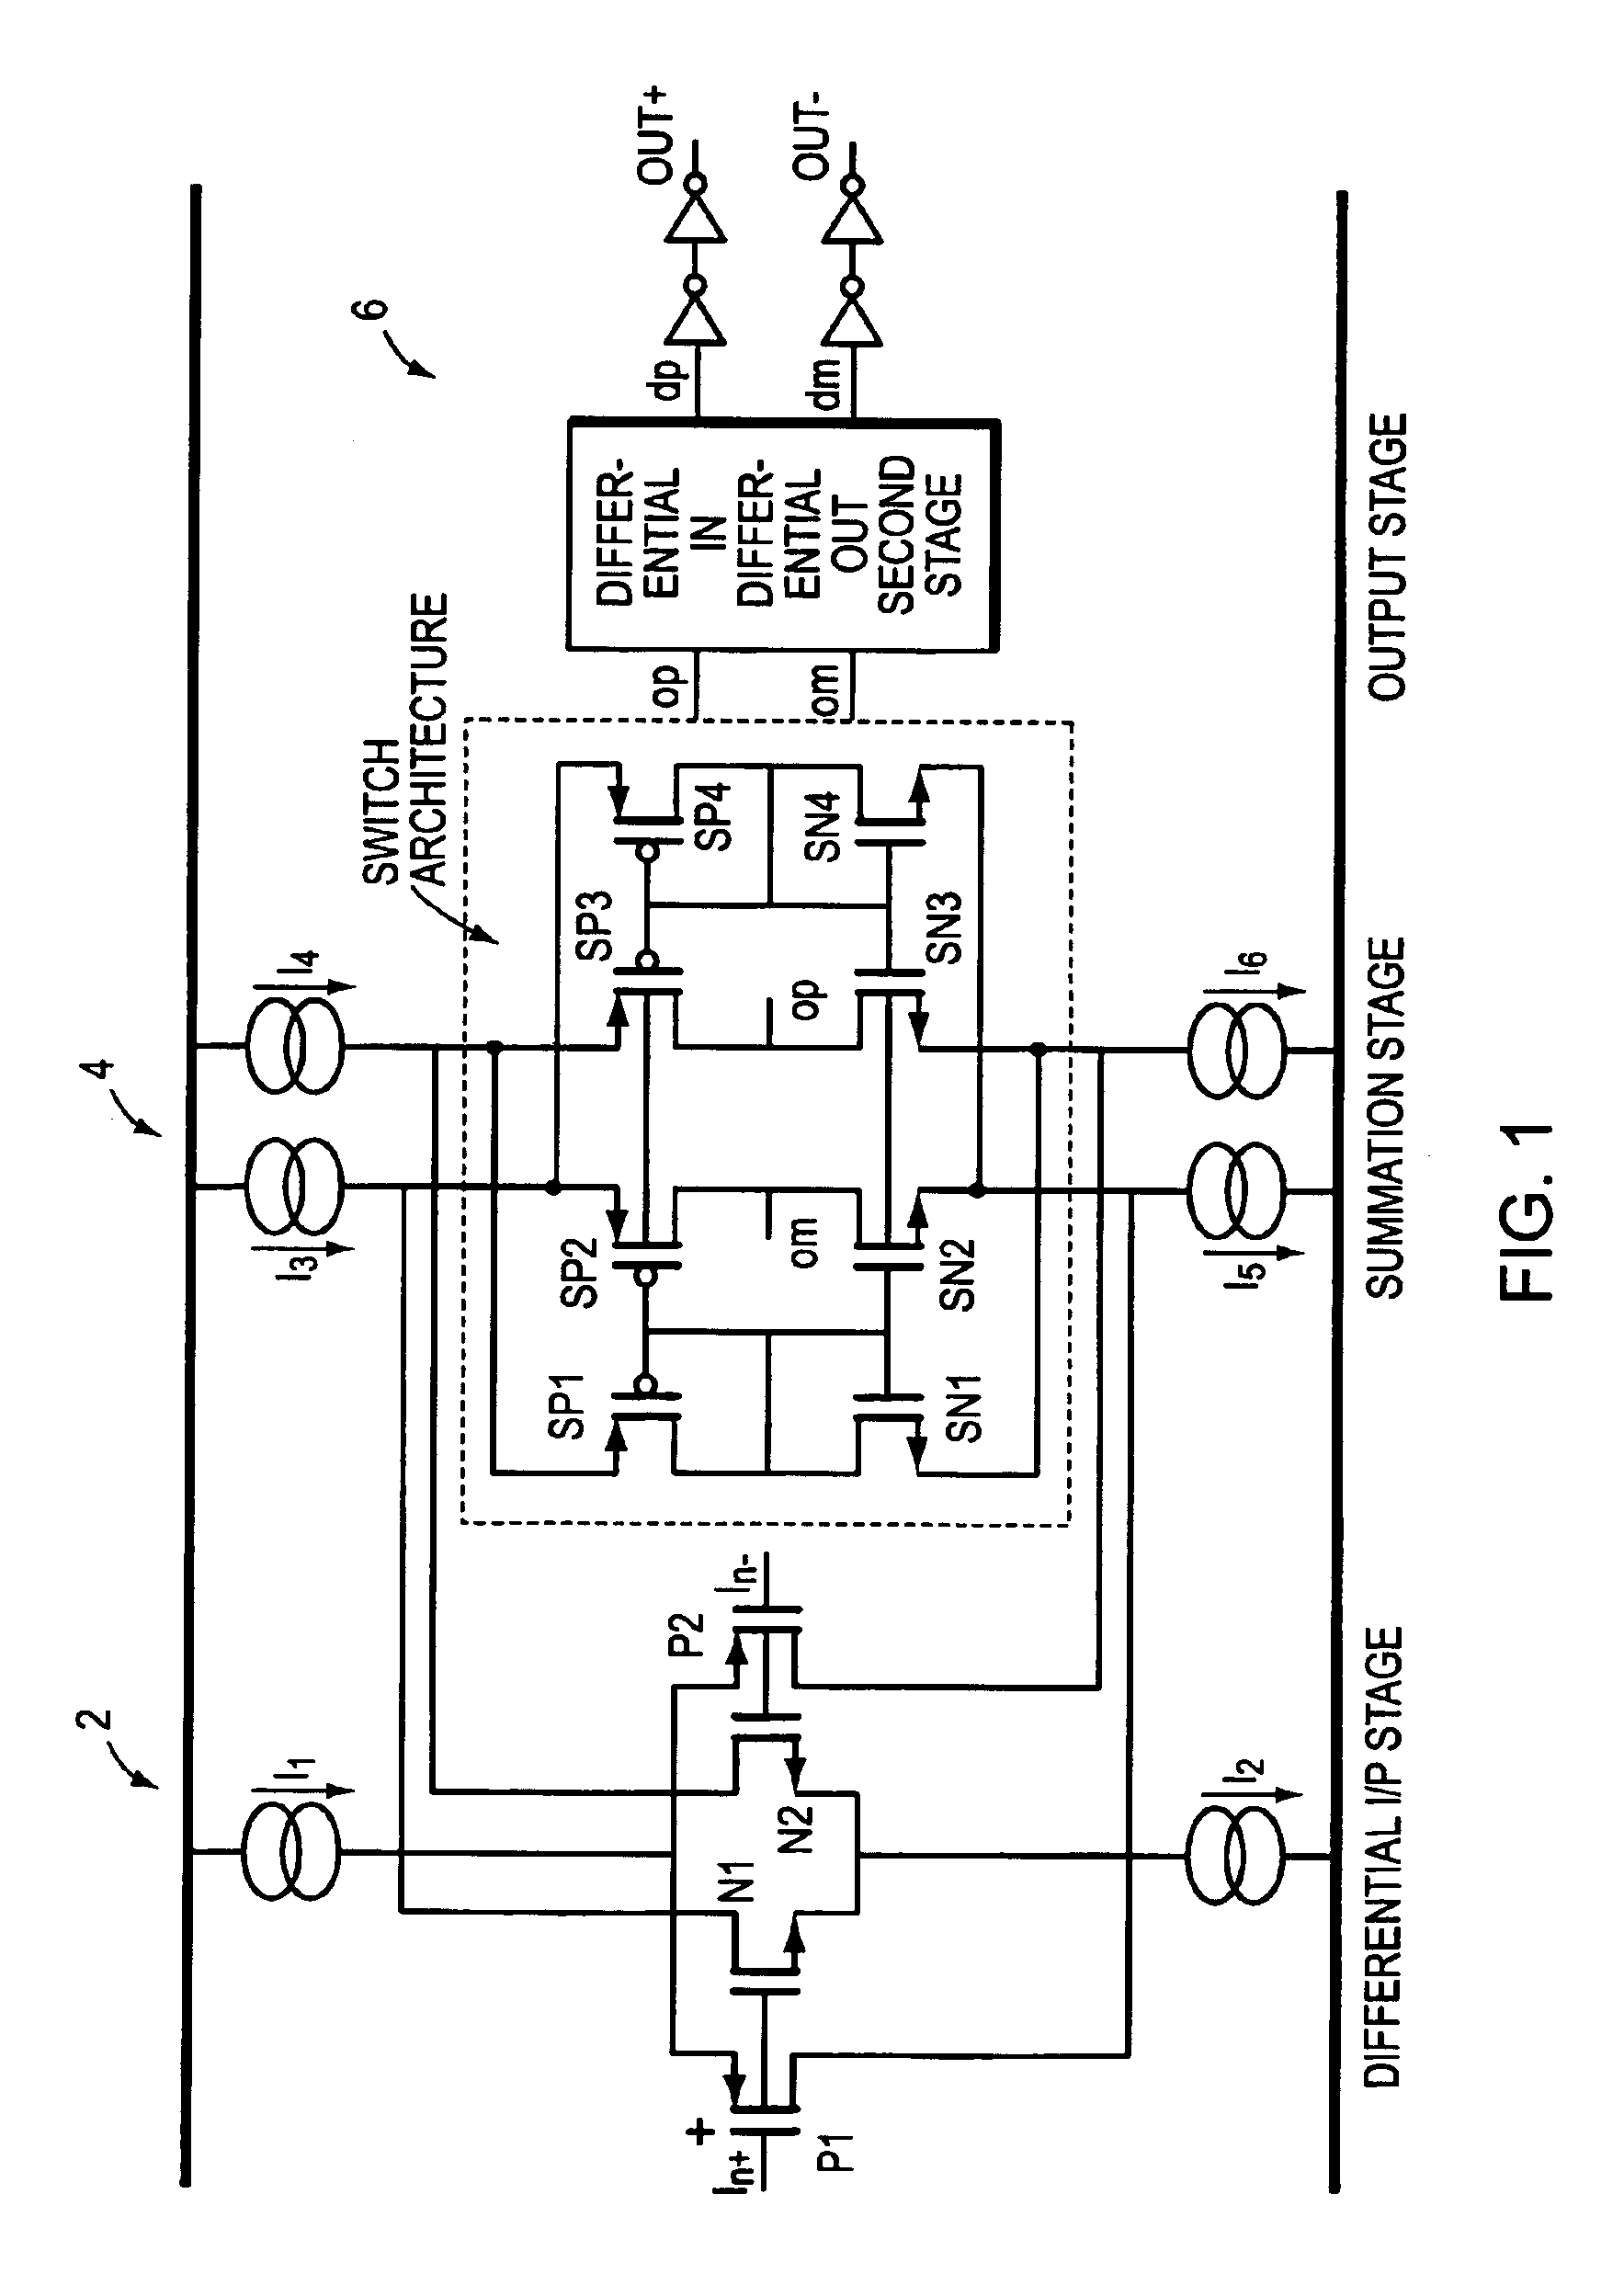 Low voltage differential in differential out receiver